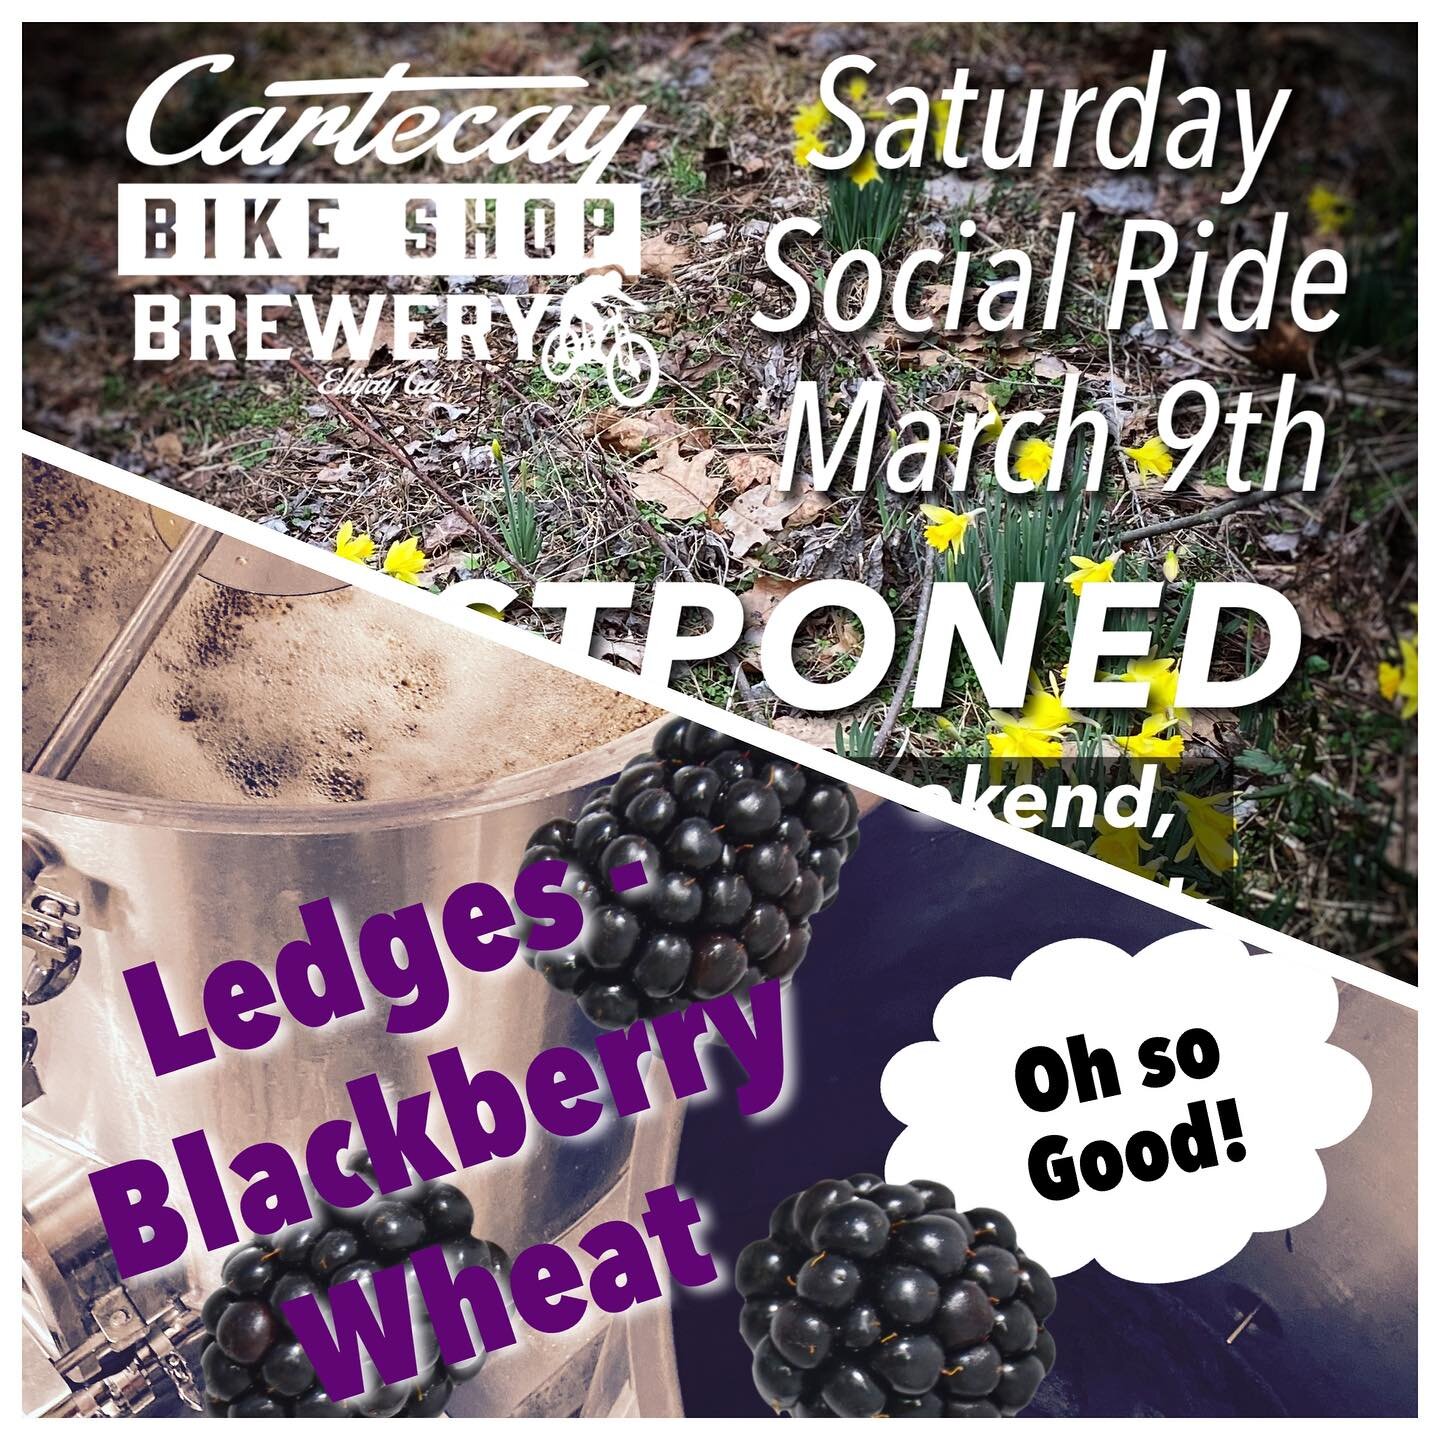 Looks like the Saturday Social Ride is a washout. But stop in for a brew anyway! Check out our new summer flavor, Ledges Blackberry Wheat, and tell us what you think.